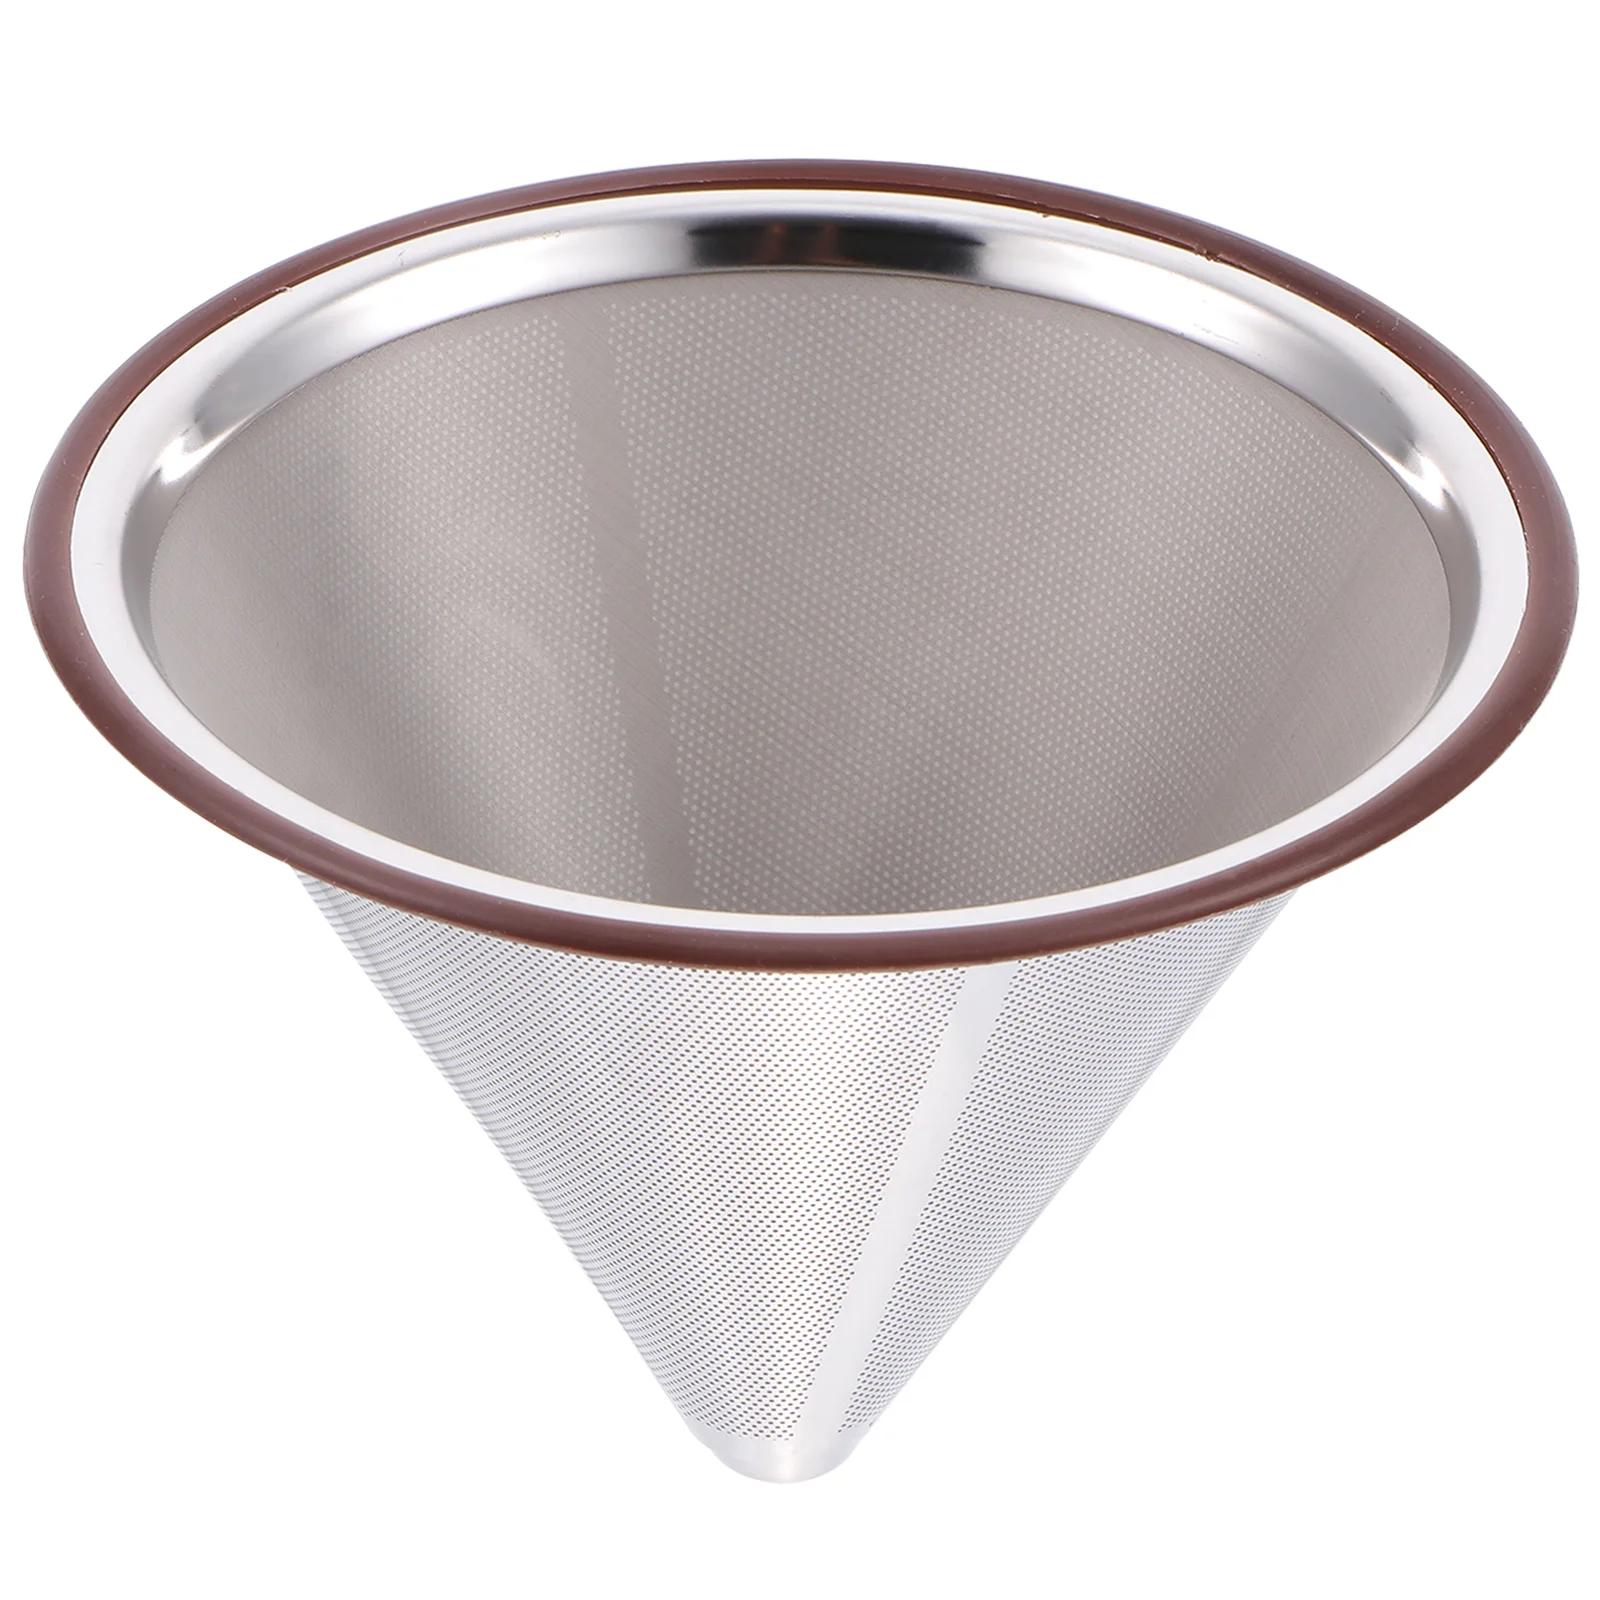 

Coffee Pour Over Filter Dripper Drip Maker Reusable Filters Cup Cone Tea Strainer Stand Loose Stainless Brew Manual Steel